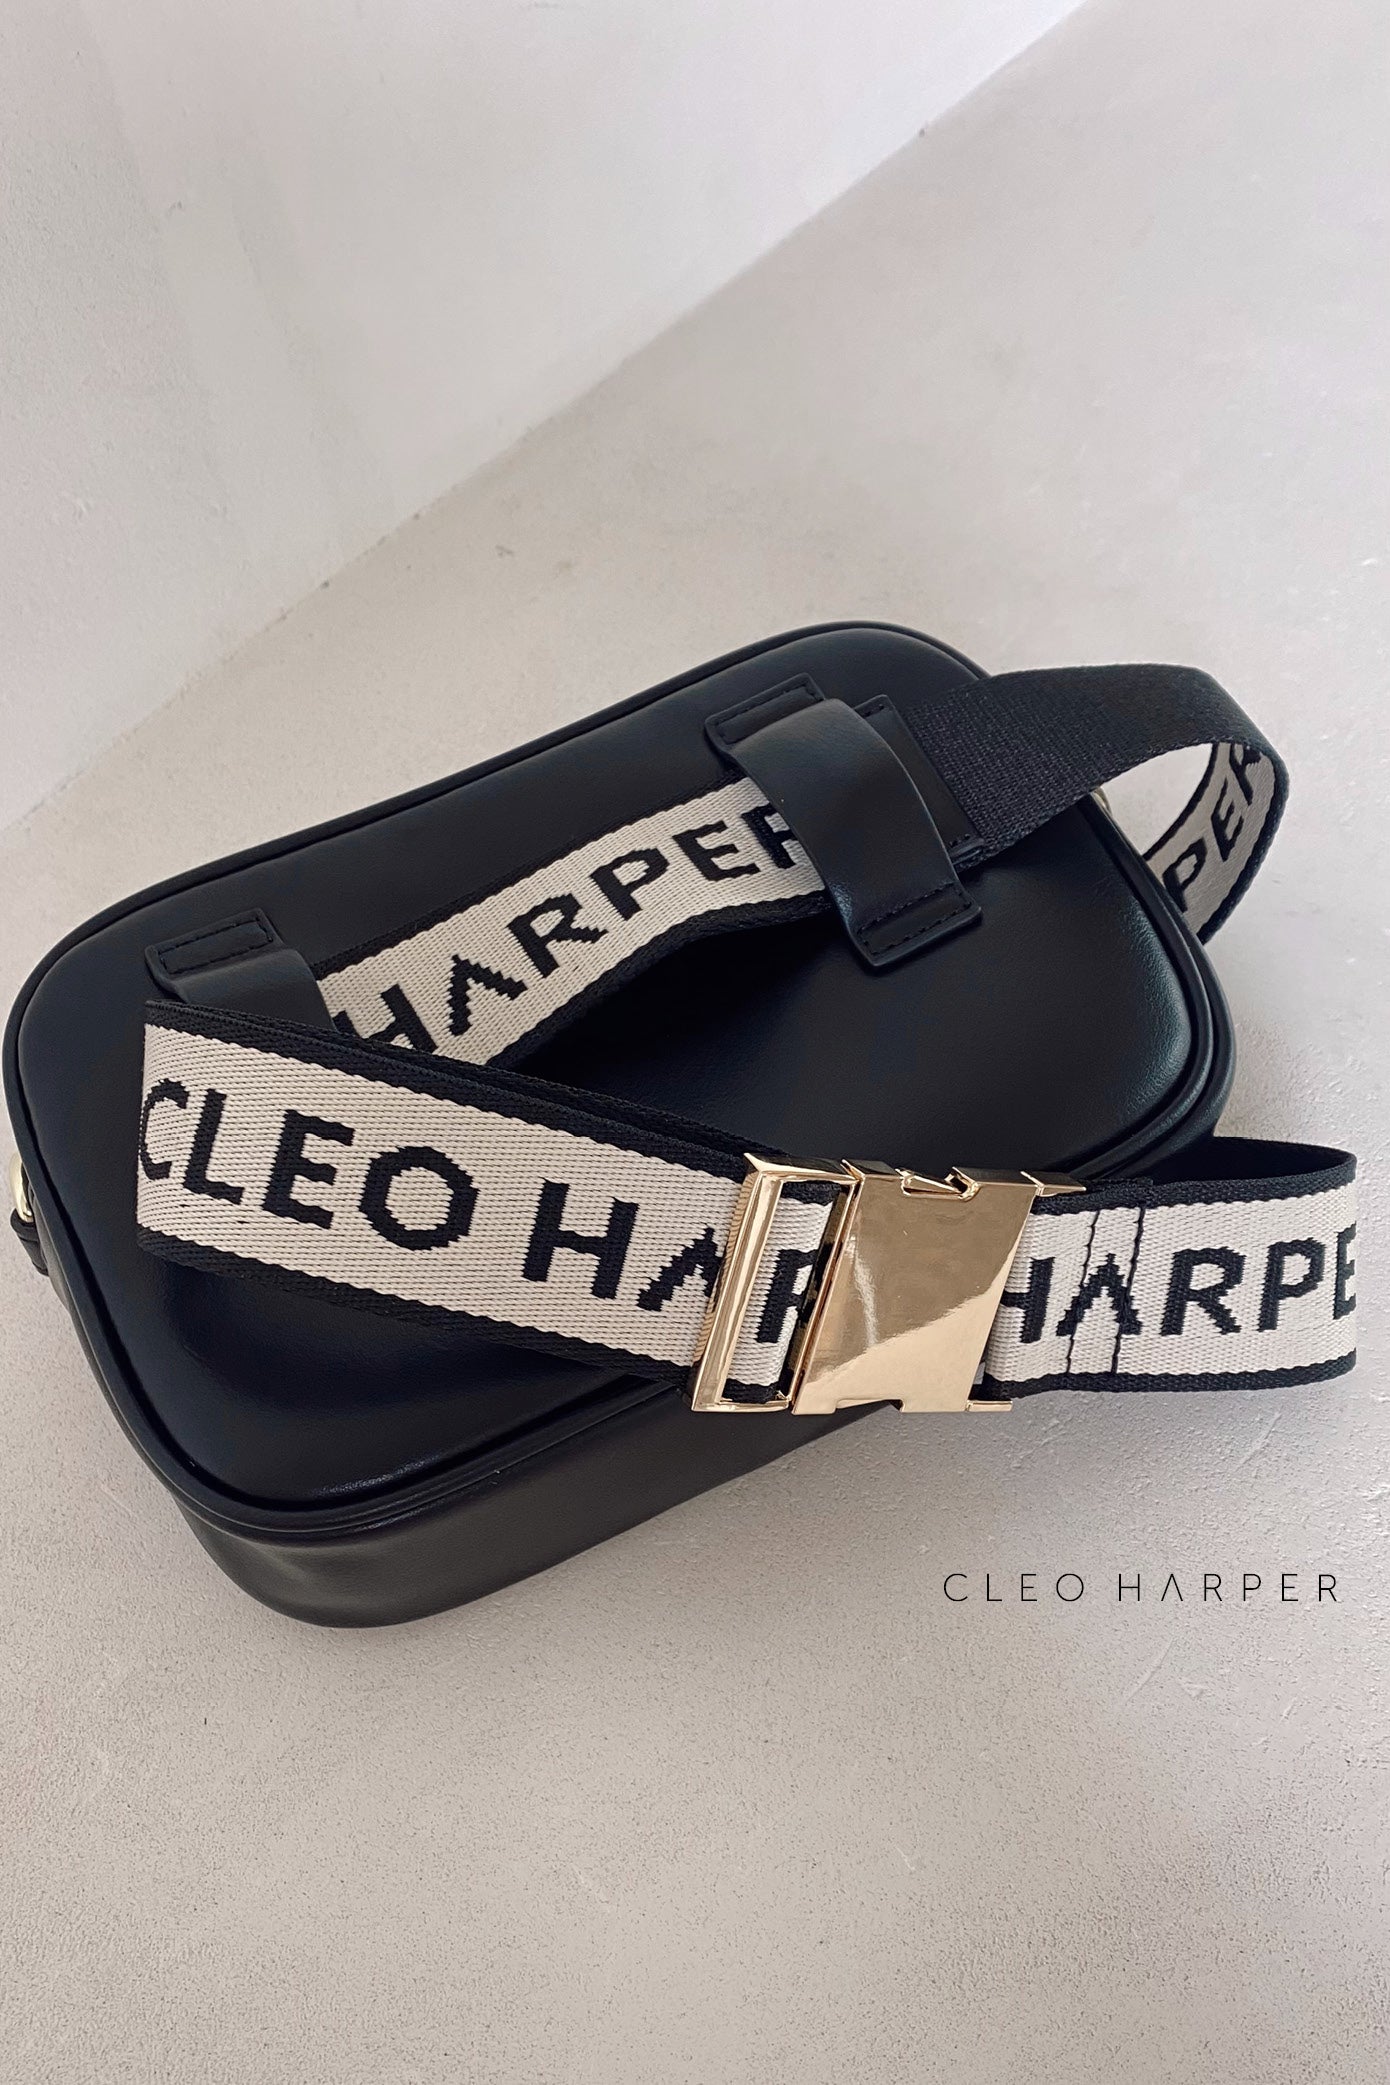 THE ESSENTIAL - CARRY ALL BAG – Cleo Harper